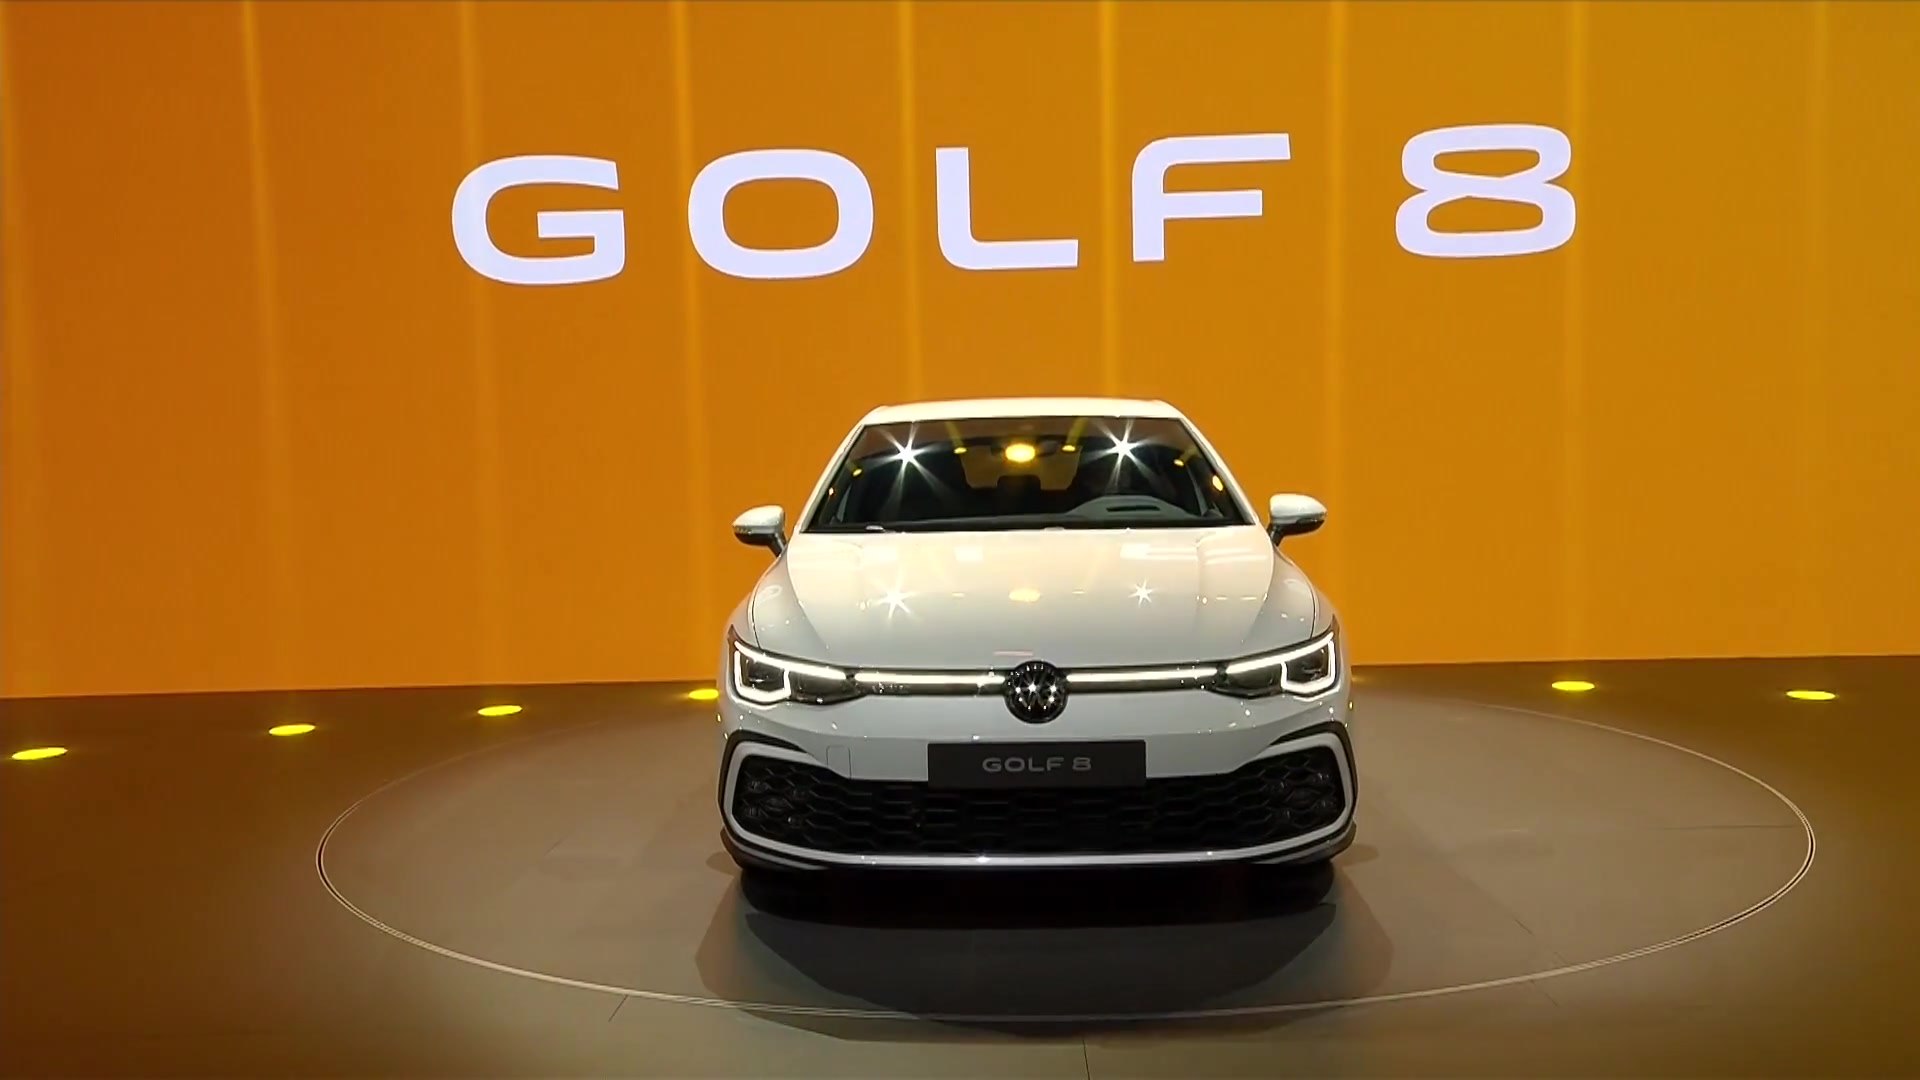 World premiere of the all-new Volkswagen Golf 8 - Reveal - video Dailymotion